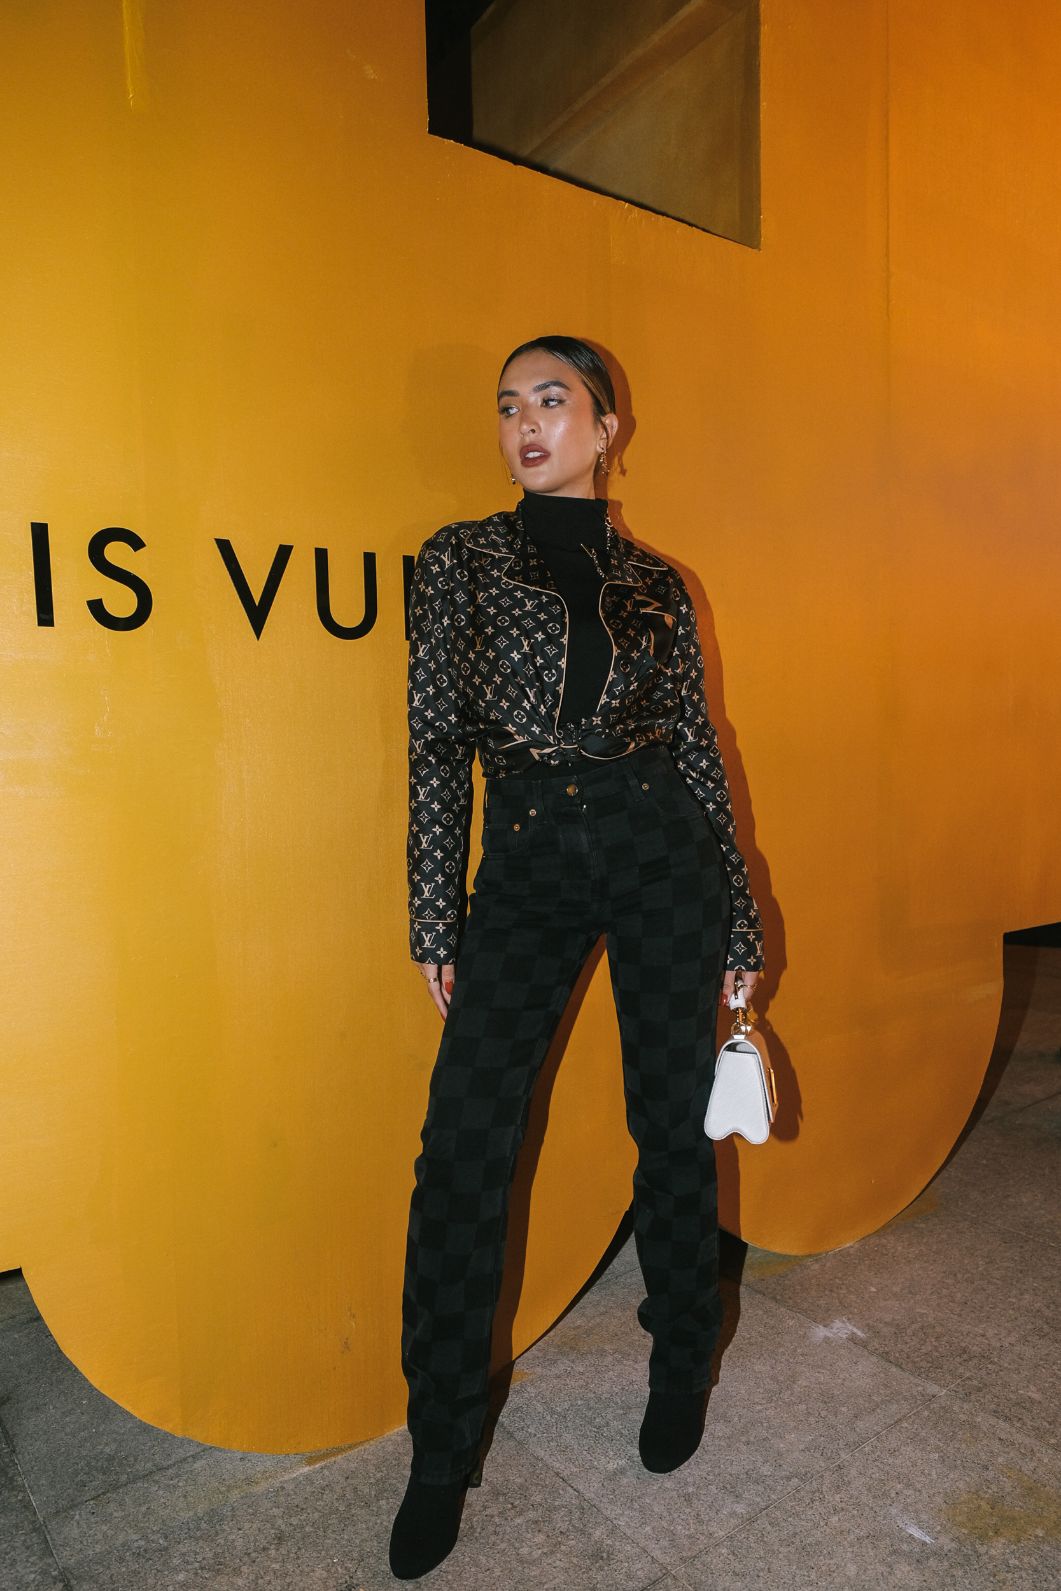 L'Officiel Philippines on X: #LouisVuitton ushers in the festive